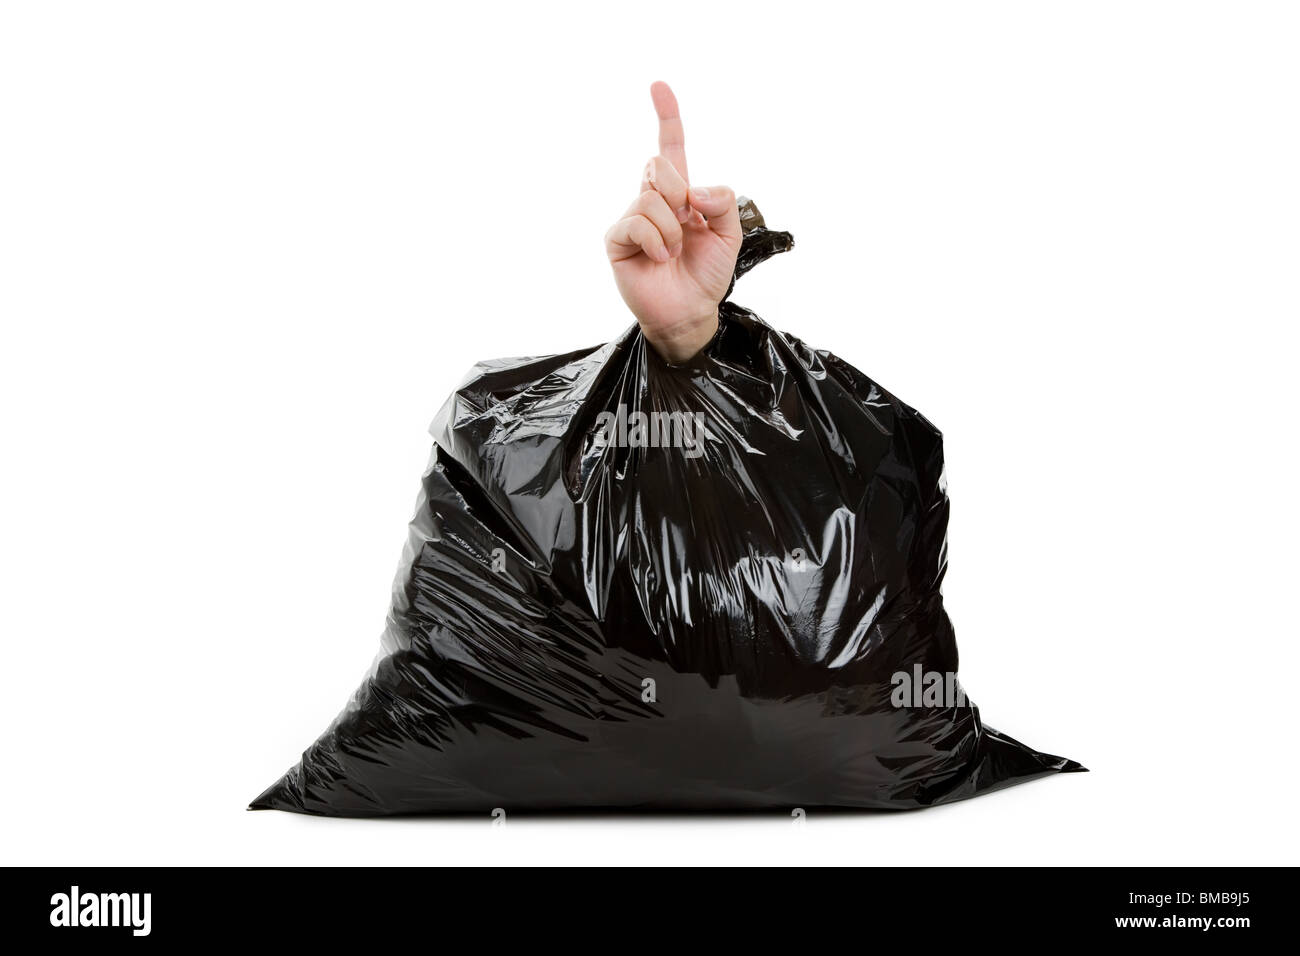 Black Garbage Bag and hand, concept of Loser Stock Photo